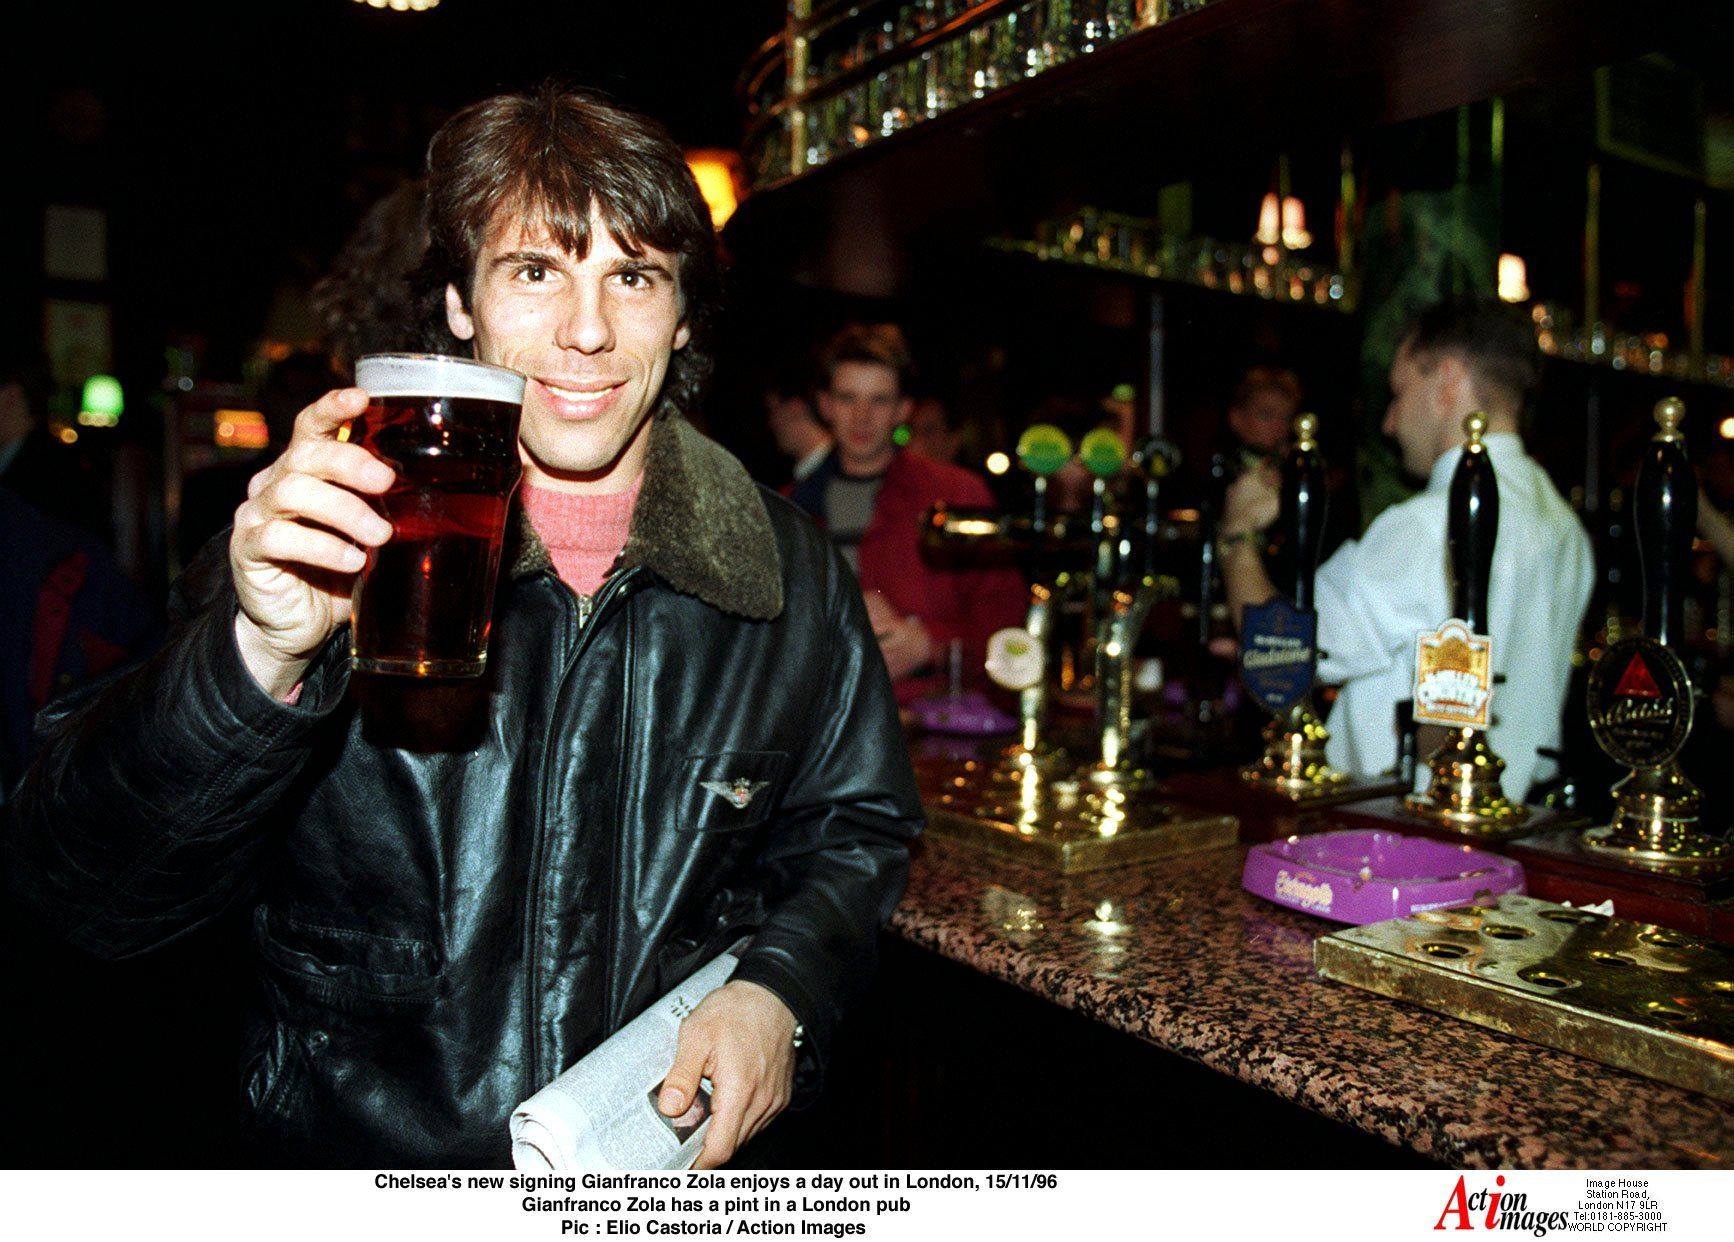 Gianfranco Zola enjoys a pint after signing for Chelsea